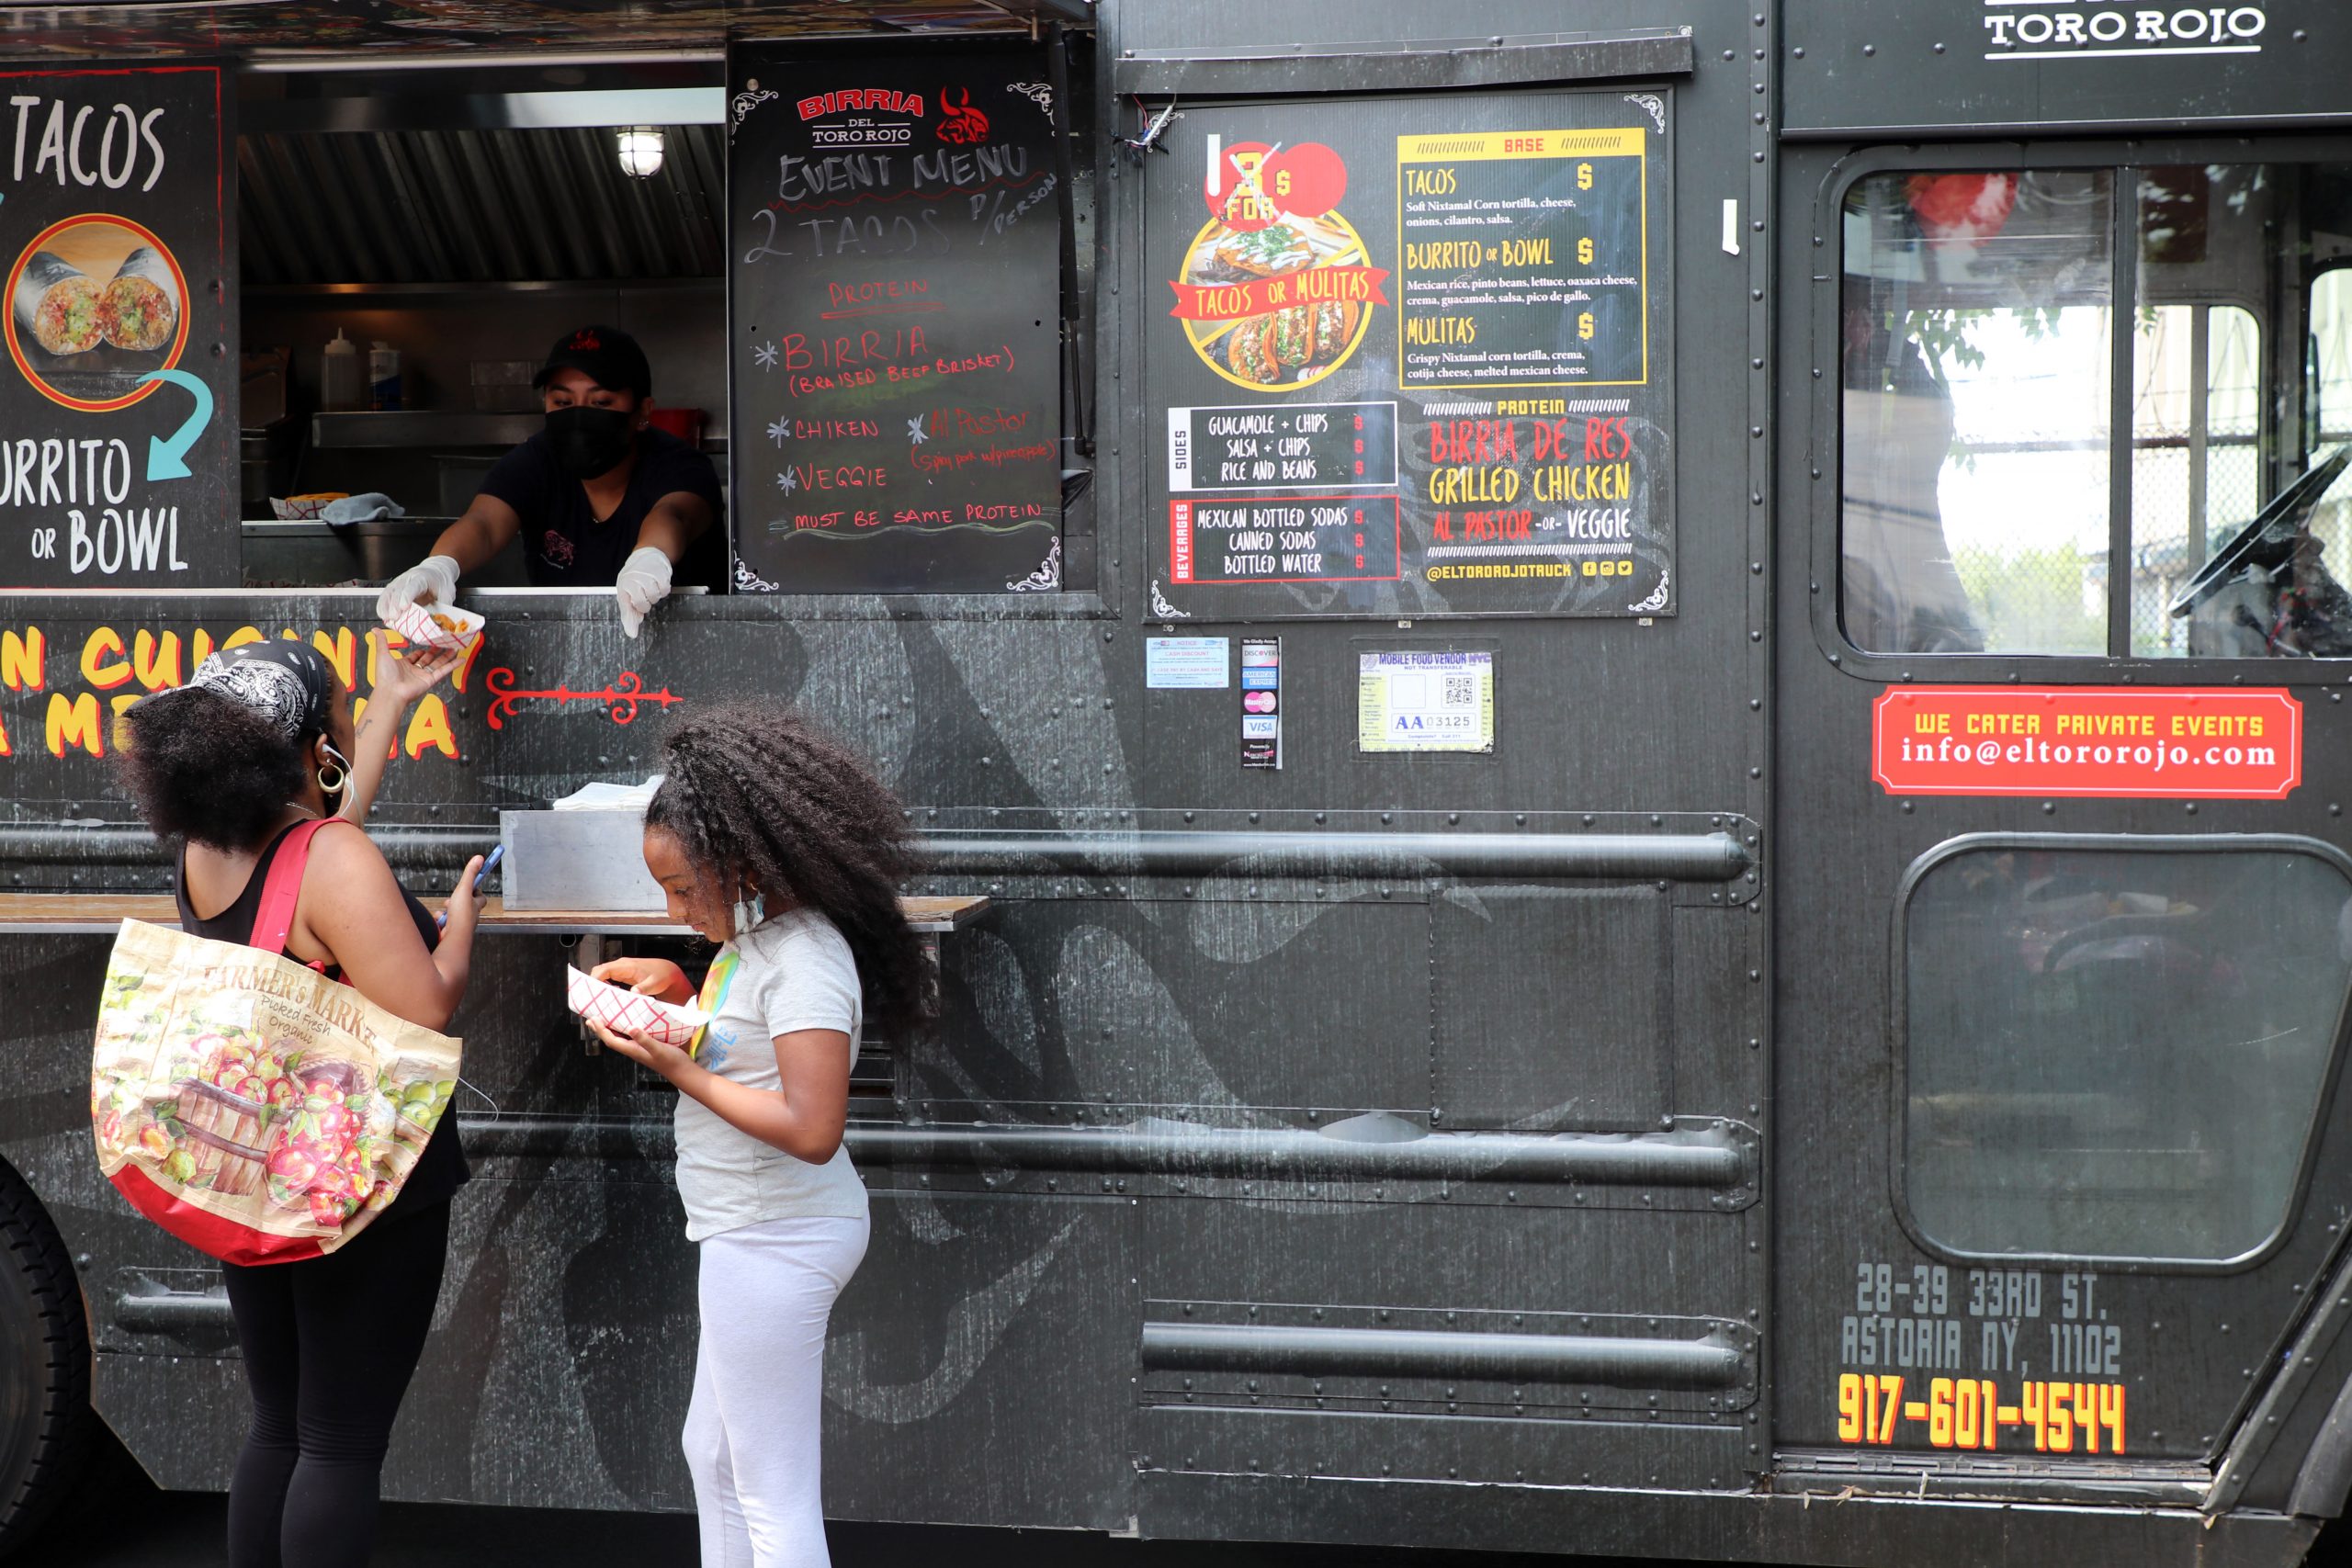 Celebrating Summer with Food Truck Fun - Homes for the Homeless NYC